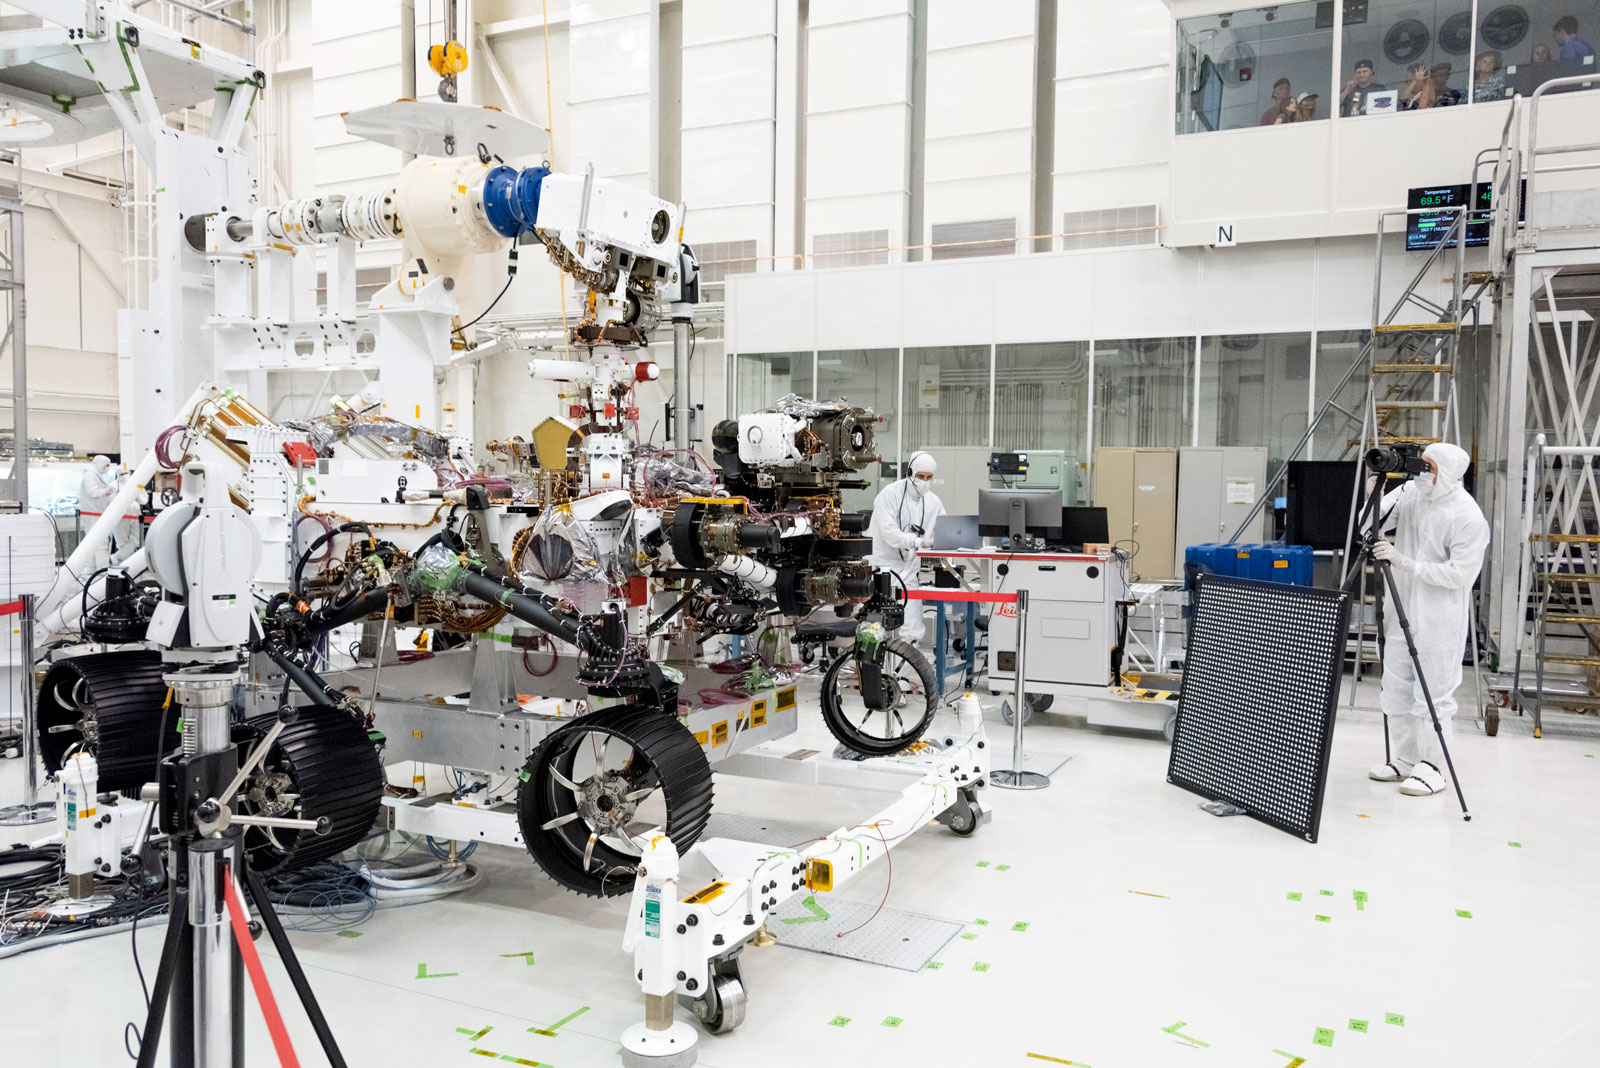  engineers test cameras on the top of the Mars 2020 rover’s mast and front chassis